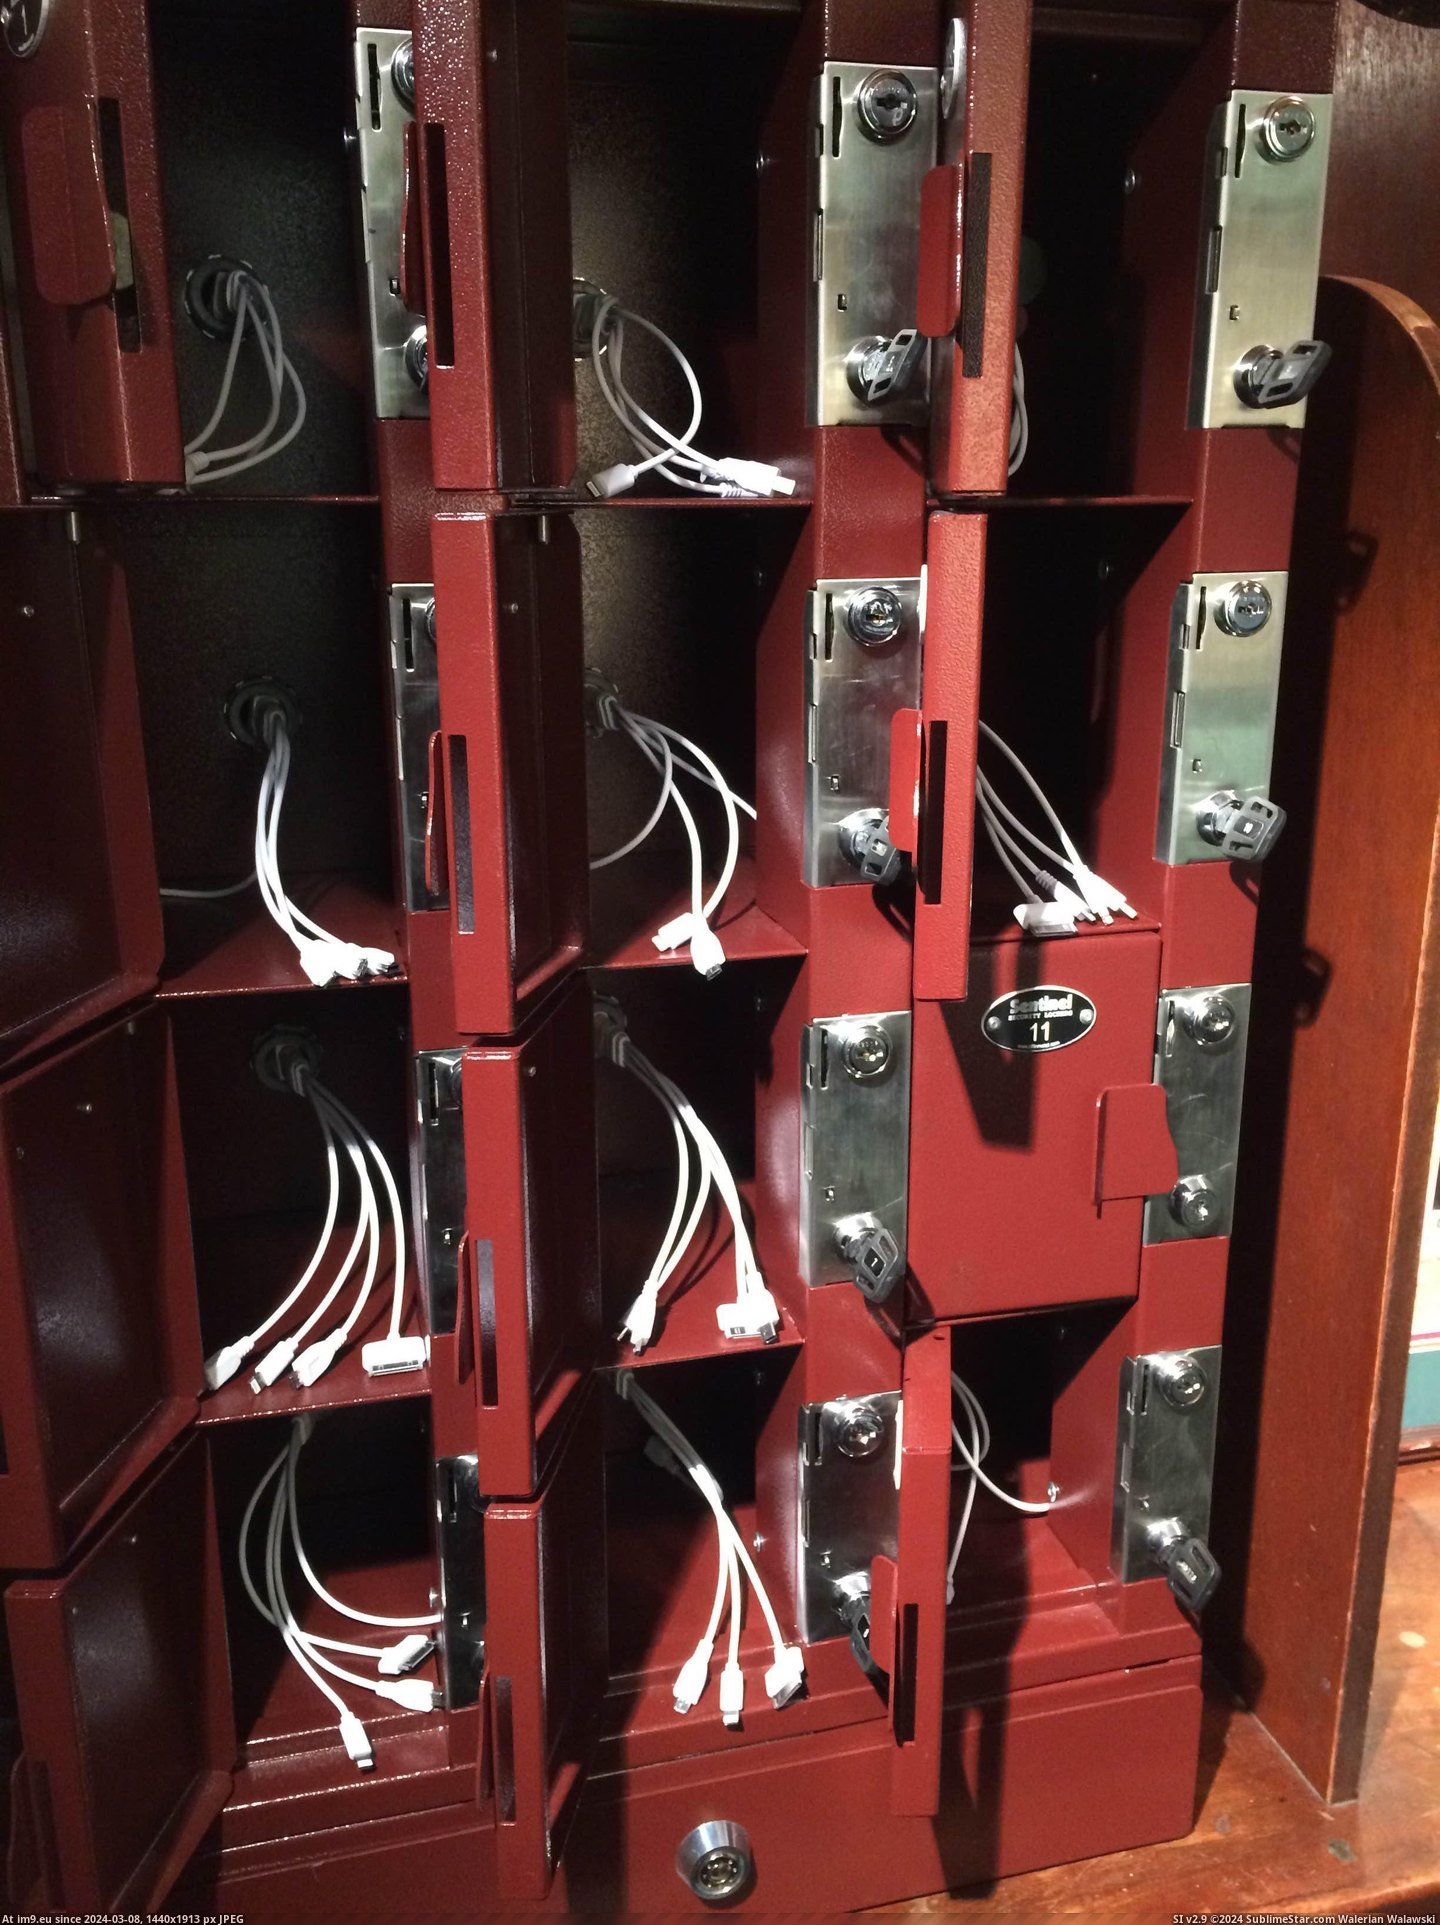 #Local #Store #Phone #Rent #Charges #Area #Bar #Locker [Mildlyinteresting] A local bar has an area where you can rent a locker to store your phone while it charges Pic. (Obraz z album My r/MILDLYINTERESTING favs))